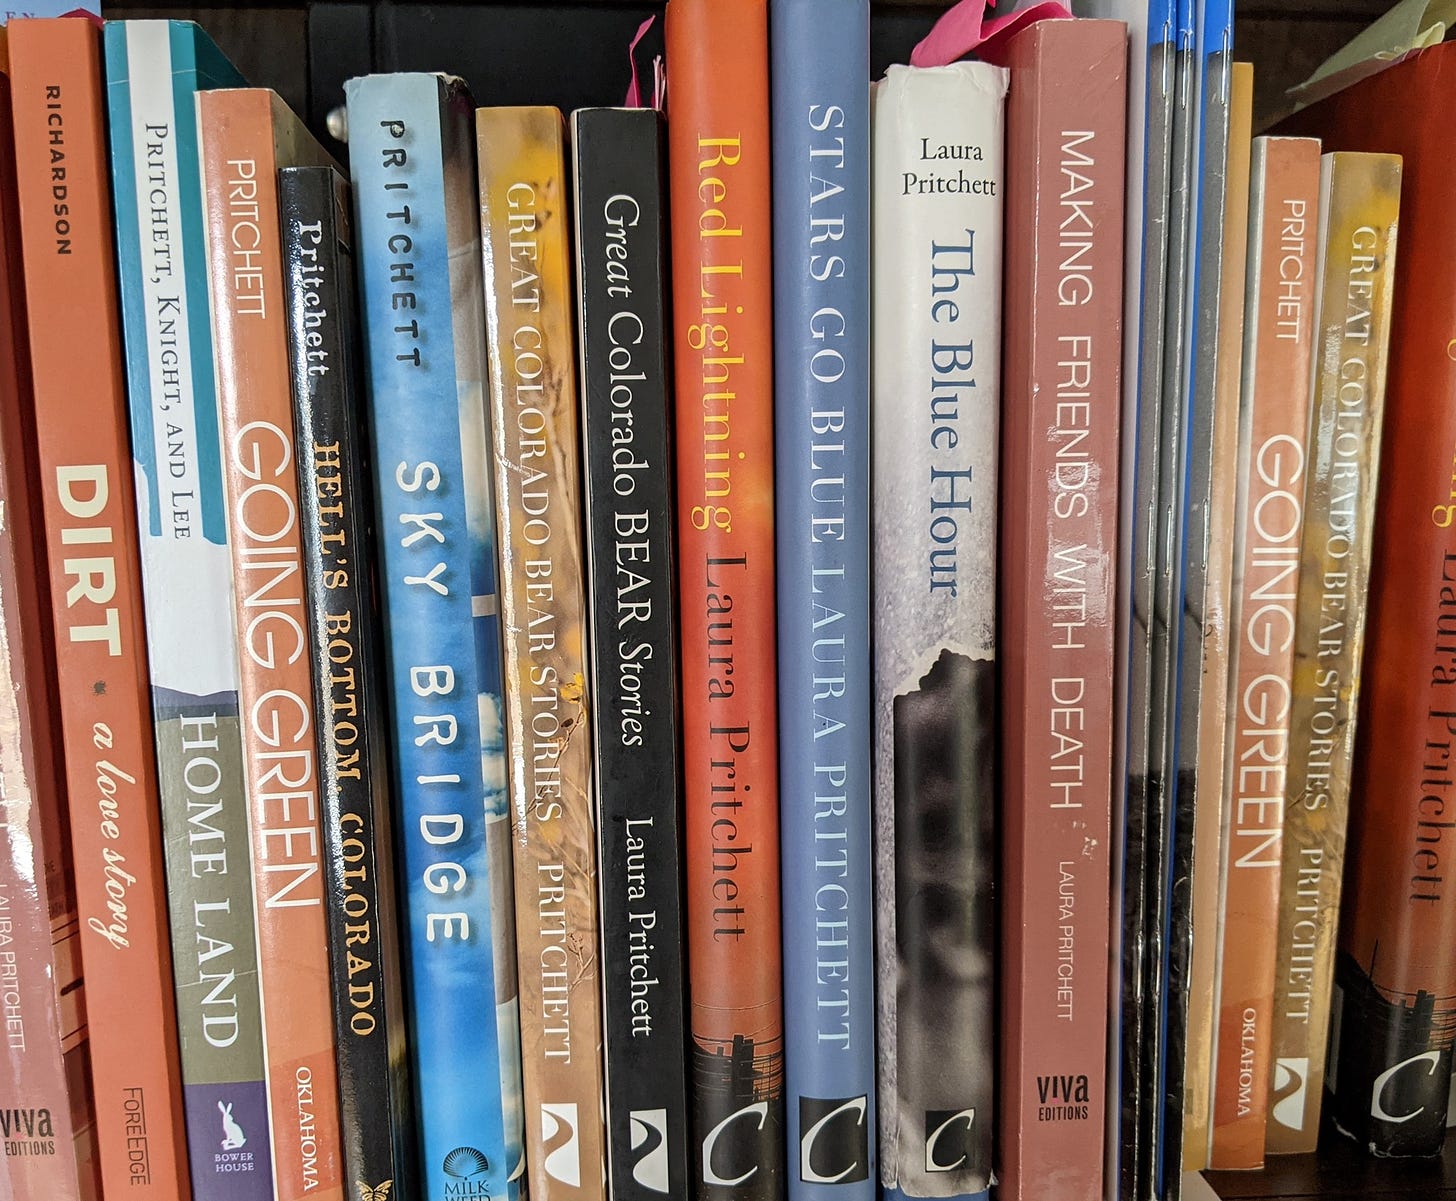 a collection of laura pritchett's books on a shelf